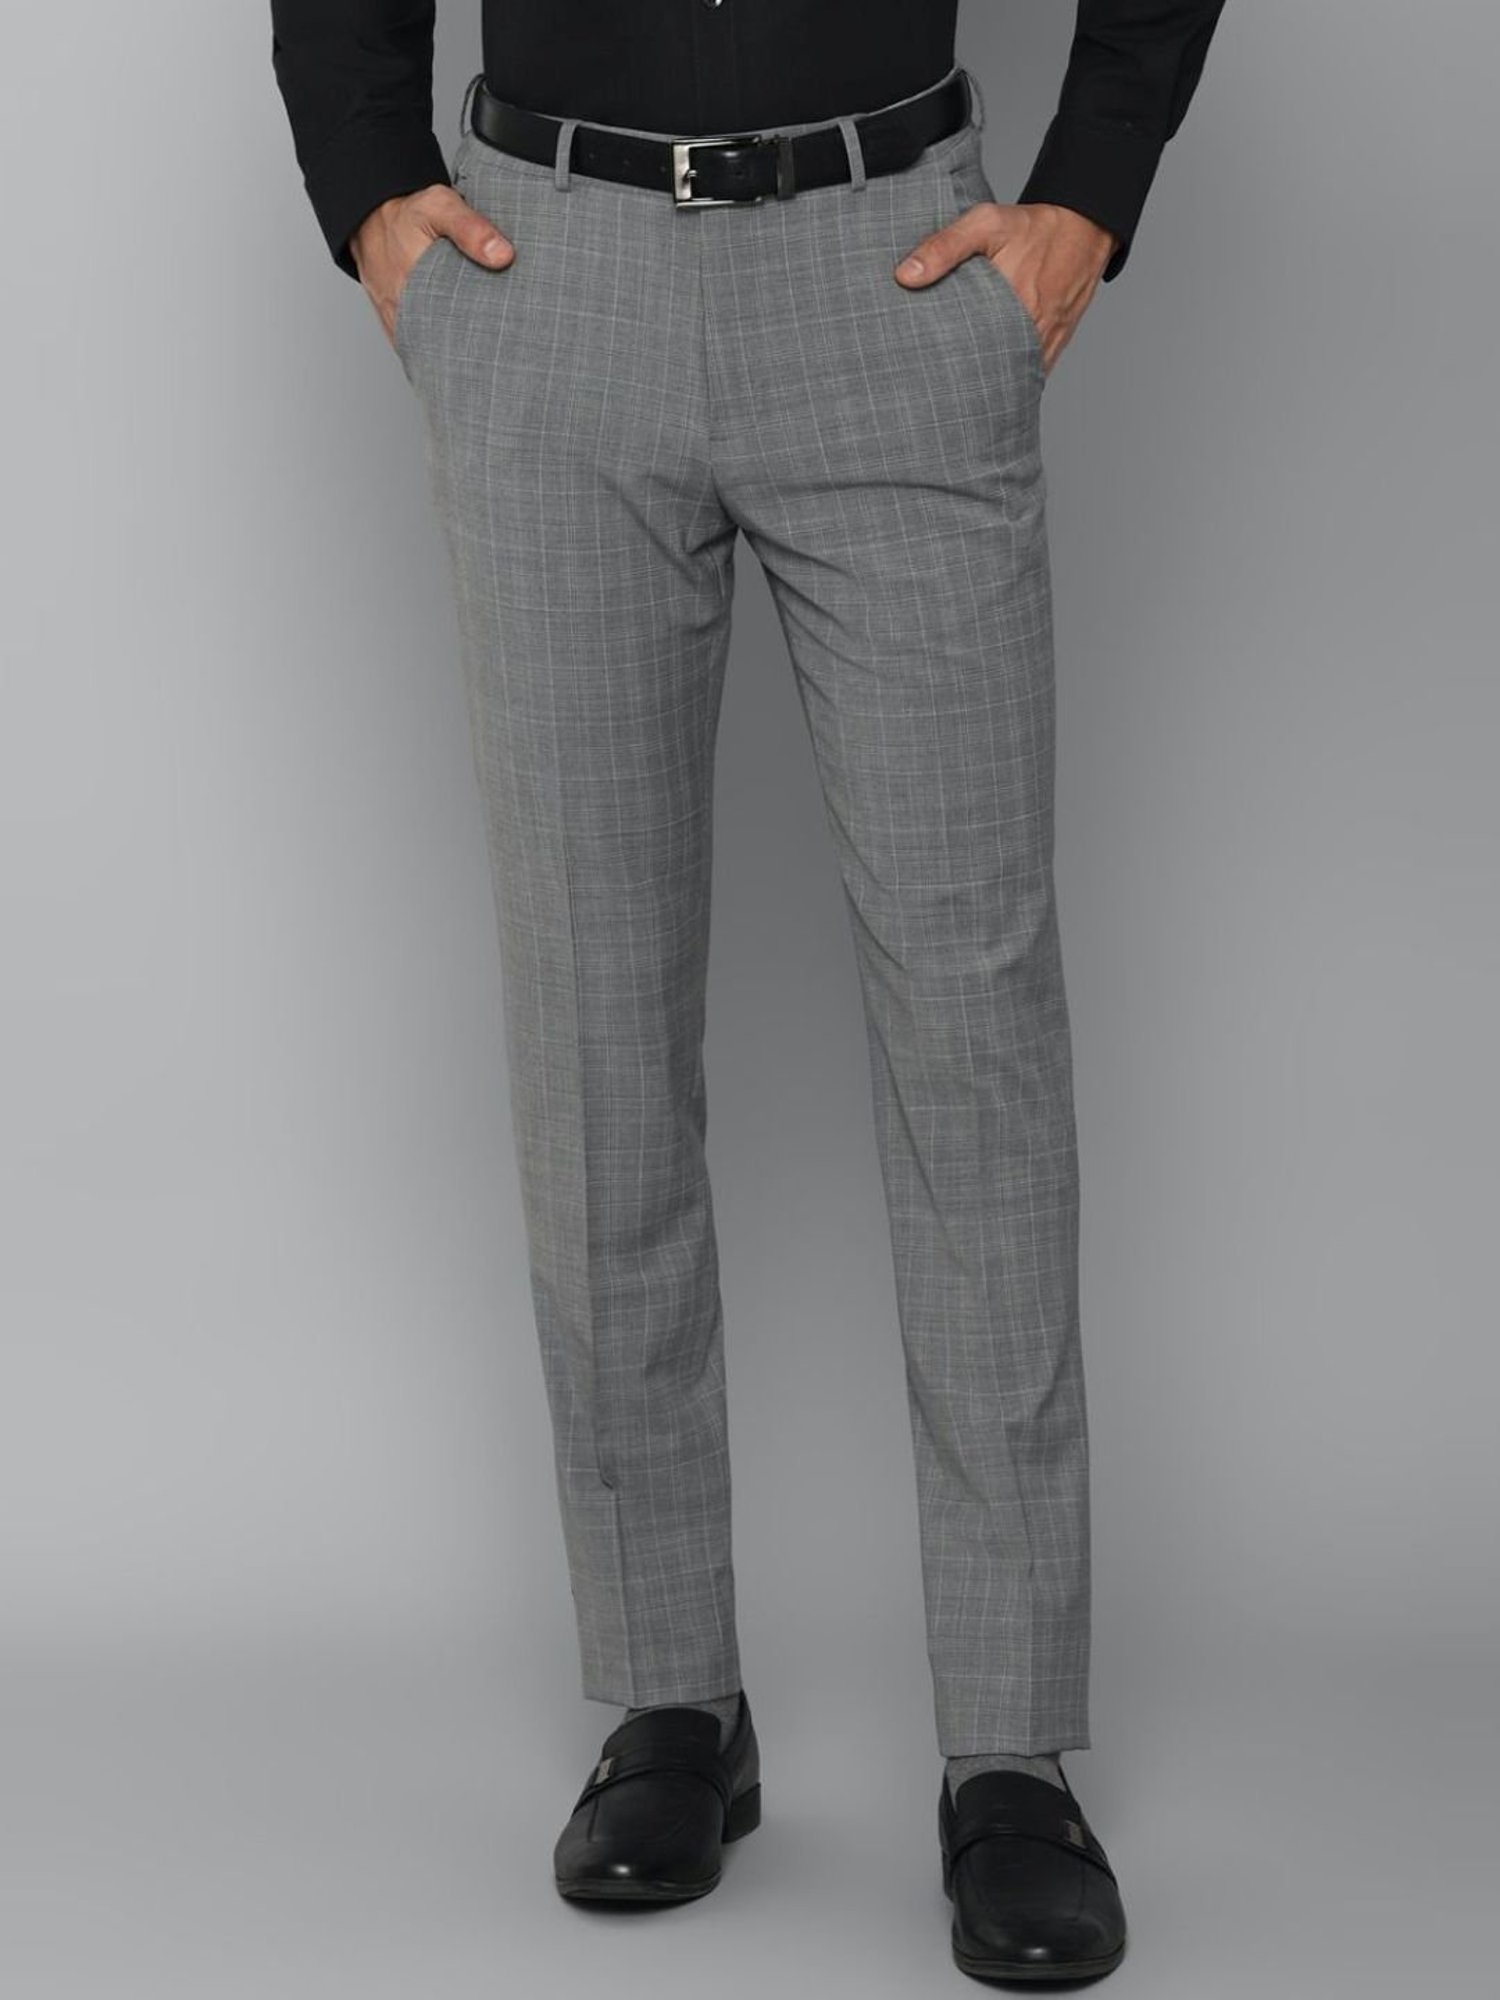 Textured Formal Trousers In Light Grey B95 Mandis